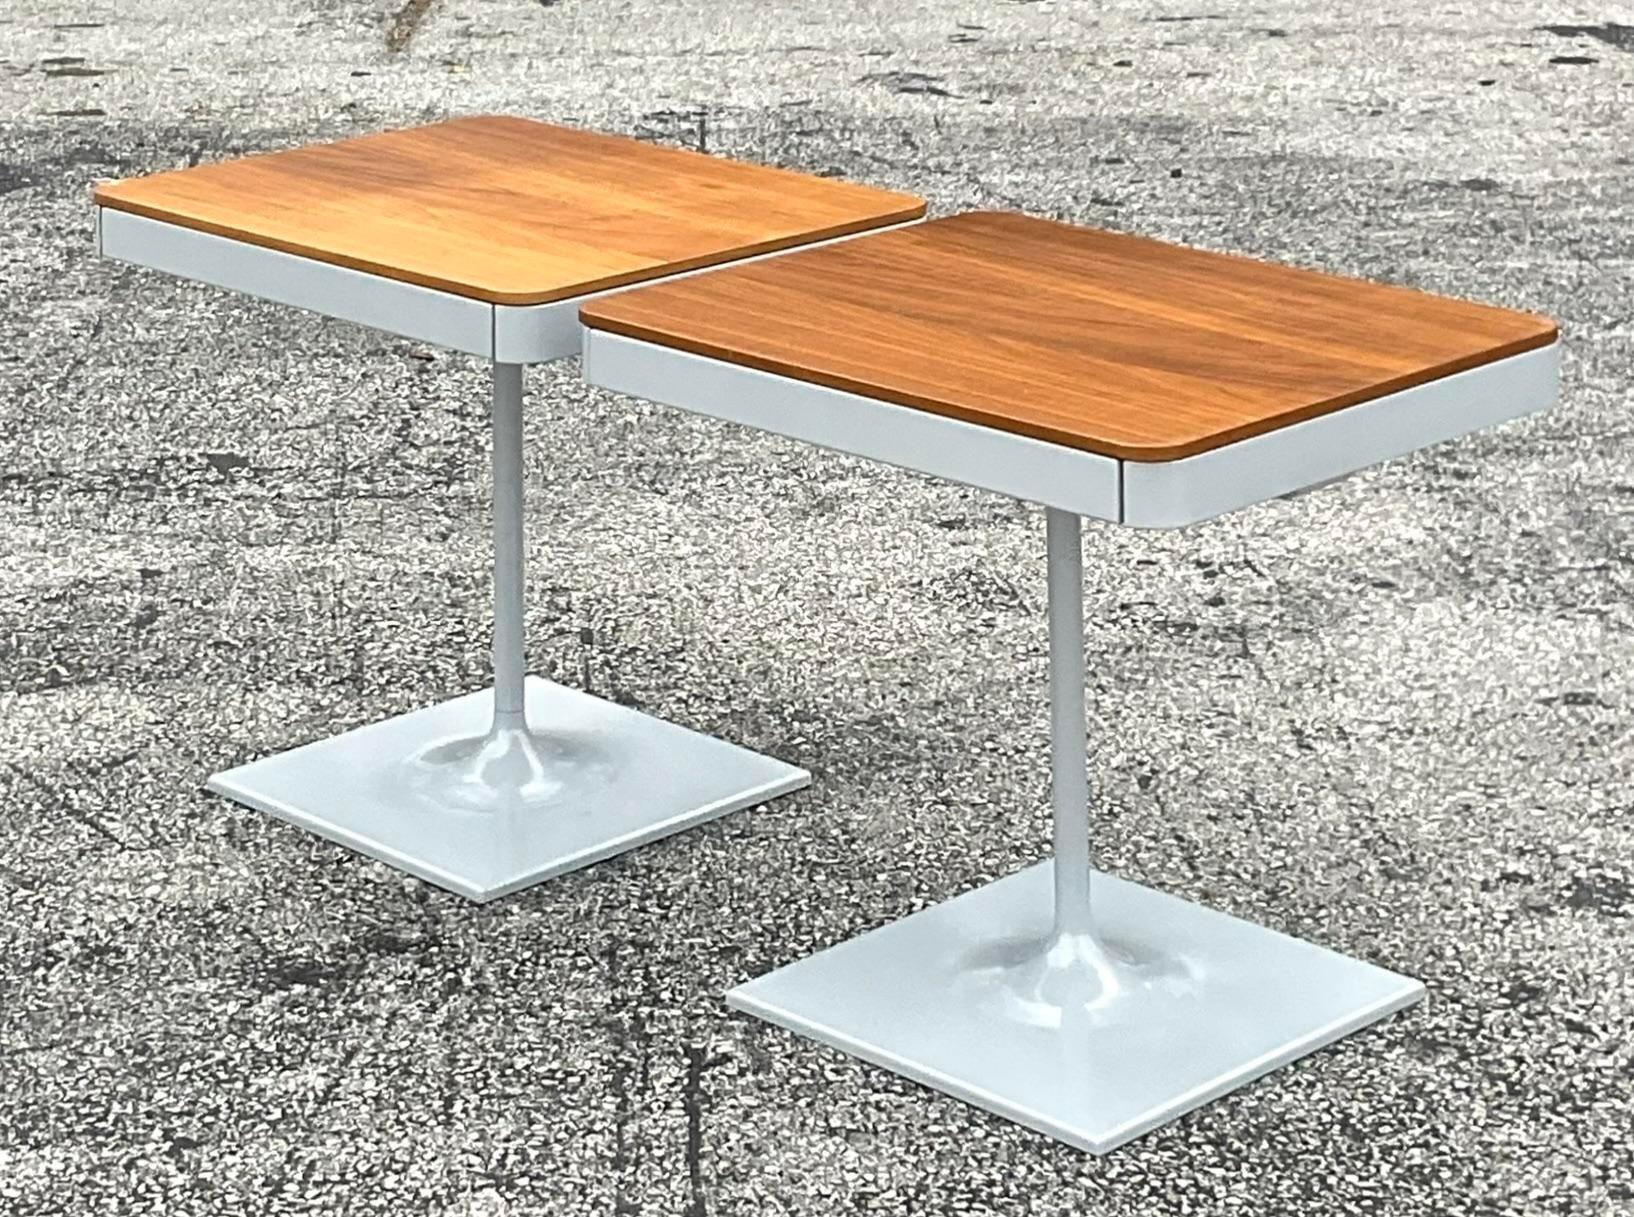 Vintage Contemporary Min Pedestal Nightstands - a Pair In Good Condition For Sale In west palm beach, FL